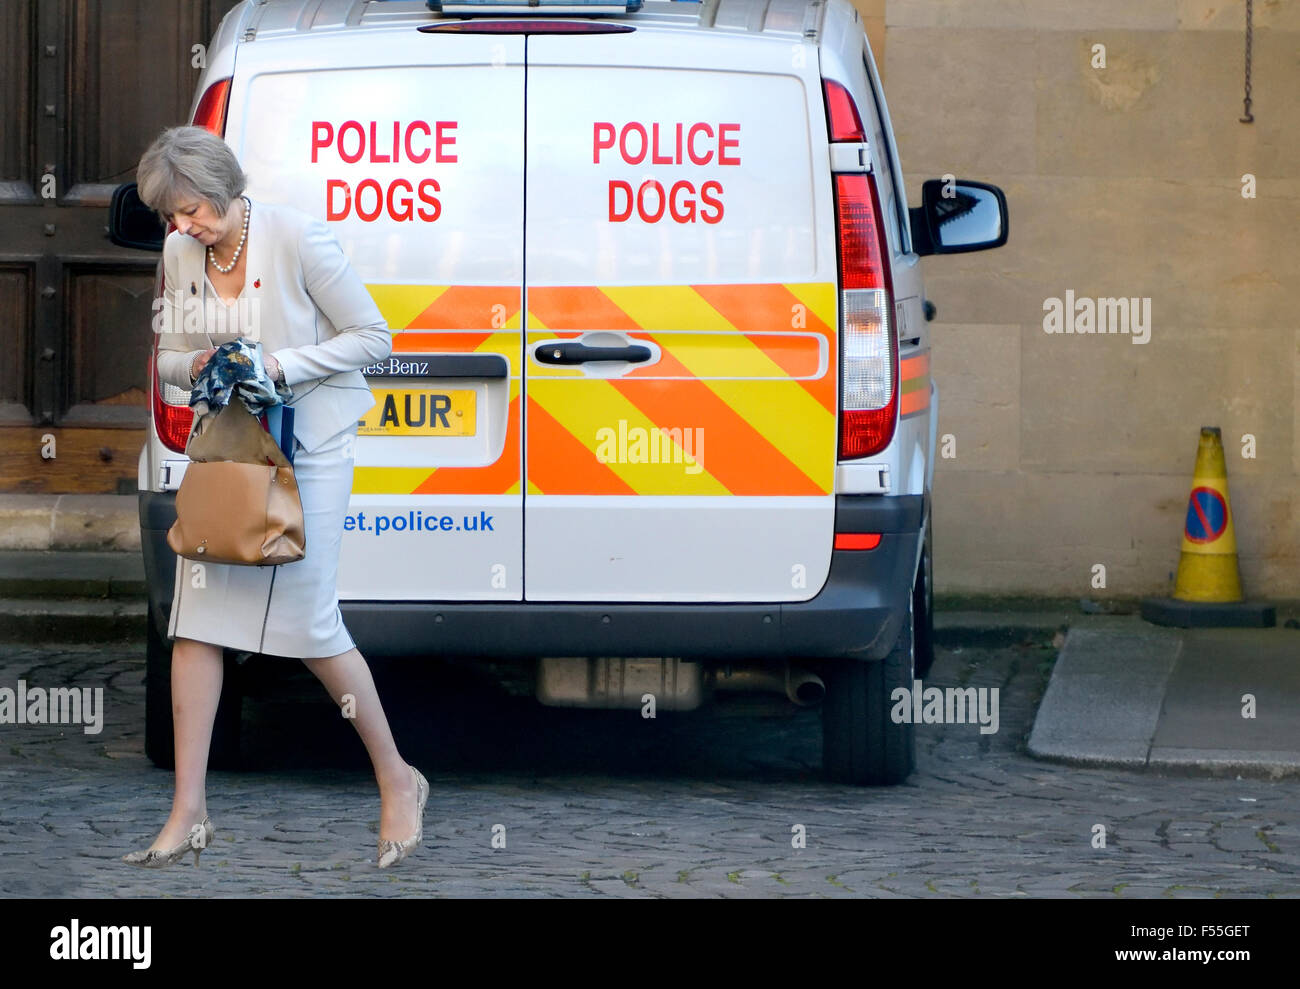 Theresa May MP, Home Secretary, walks past a Police Dog van in the grounds of the Houses of Parliament, Westminster, London Stock Photo